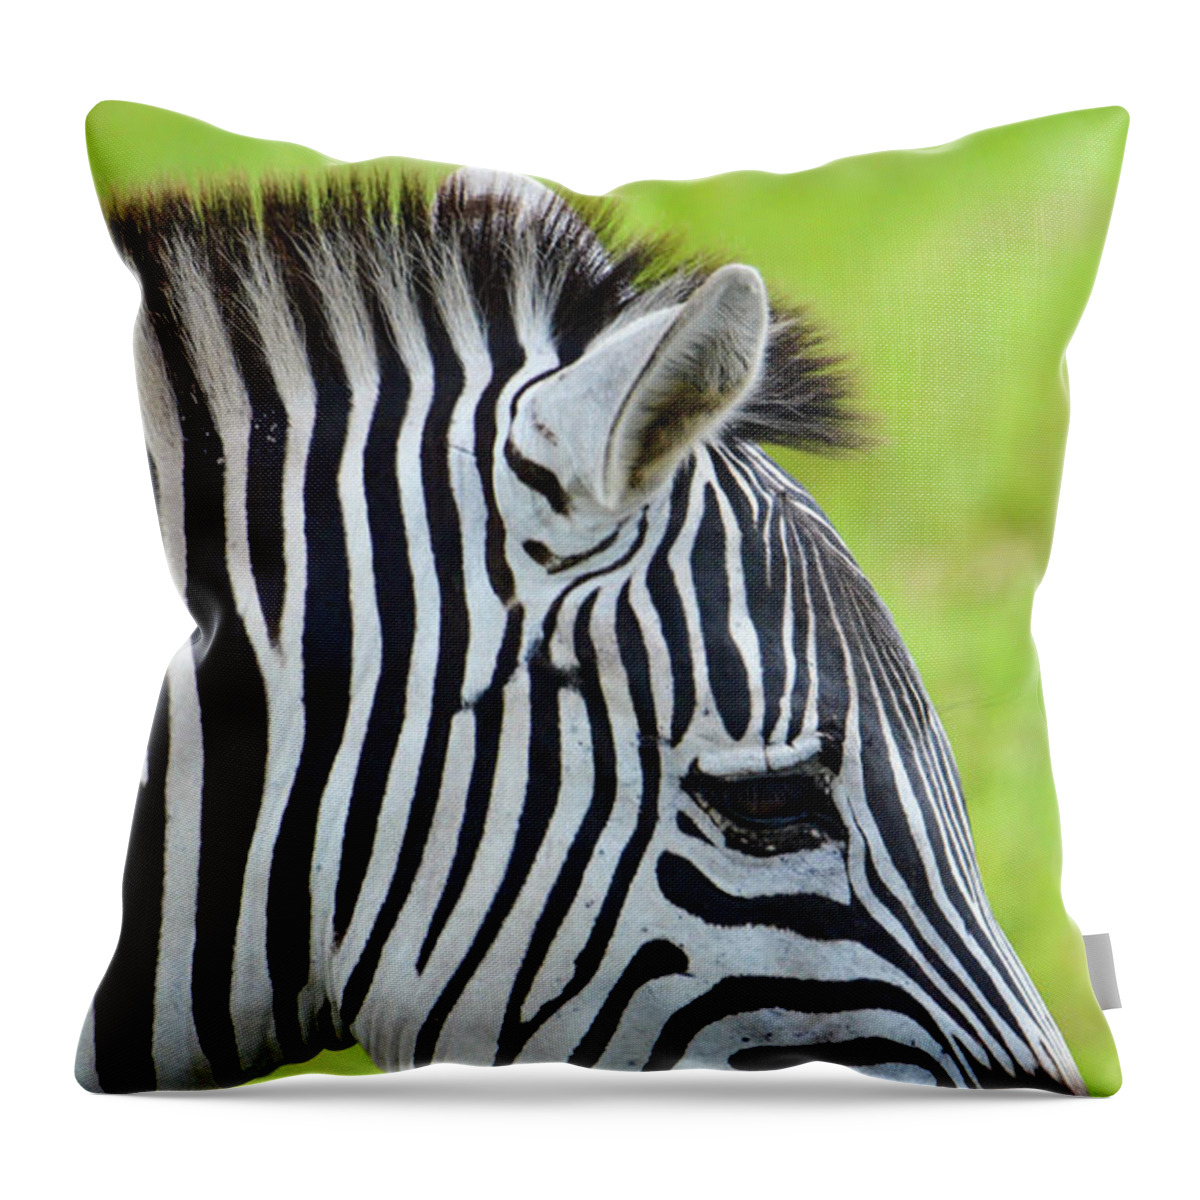 Zebra Throw Pillow featuring the photograph Zebra Head Smiling with Mouth Open by Artful Imagery